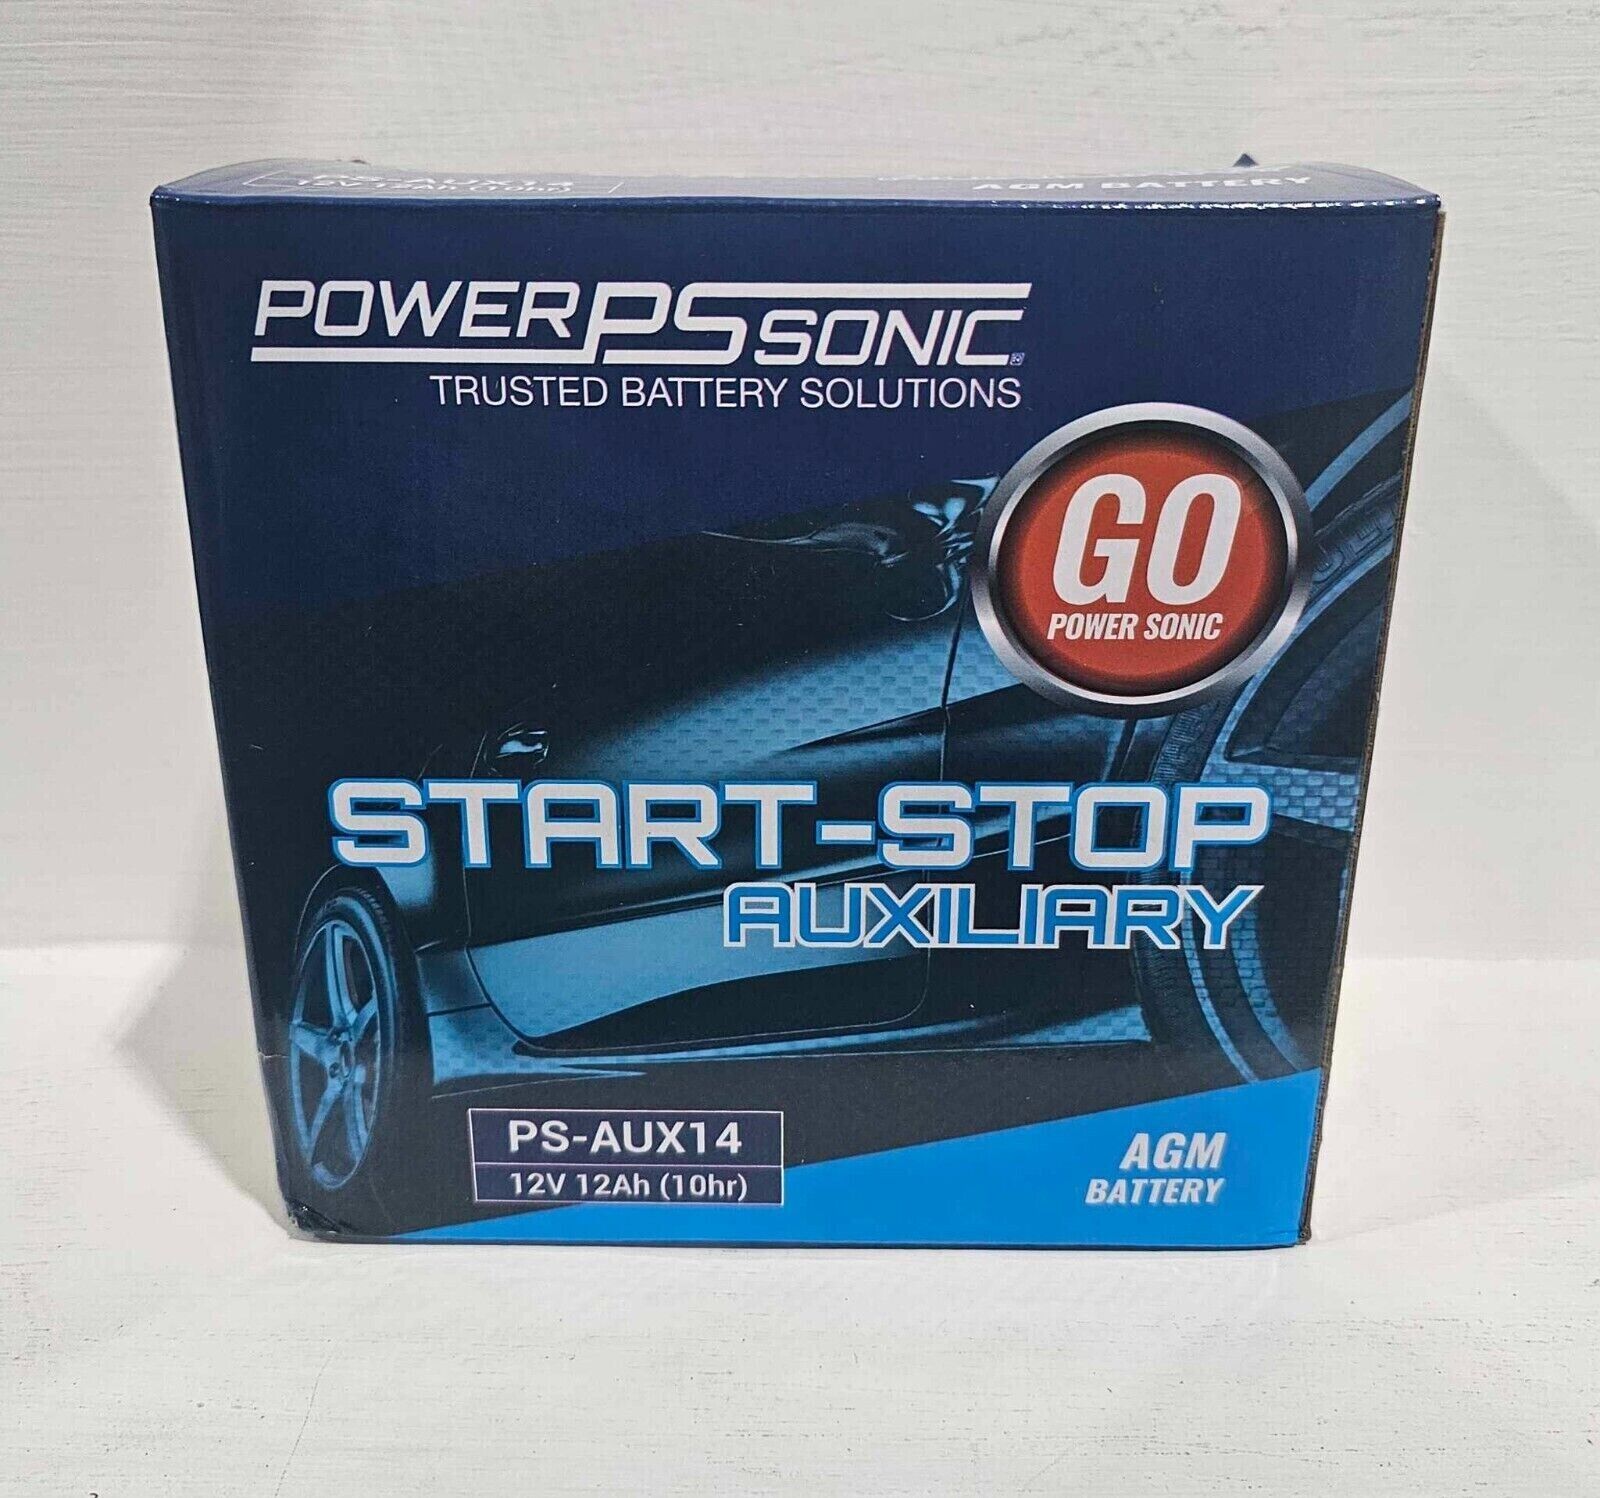 PowerSonic PS-AUX14     AUX14 Battery AGM - FRESH STOCK    5.71 x 5.91 x 3.43 in